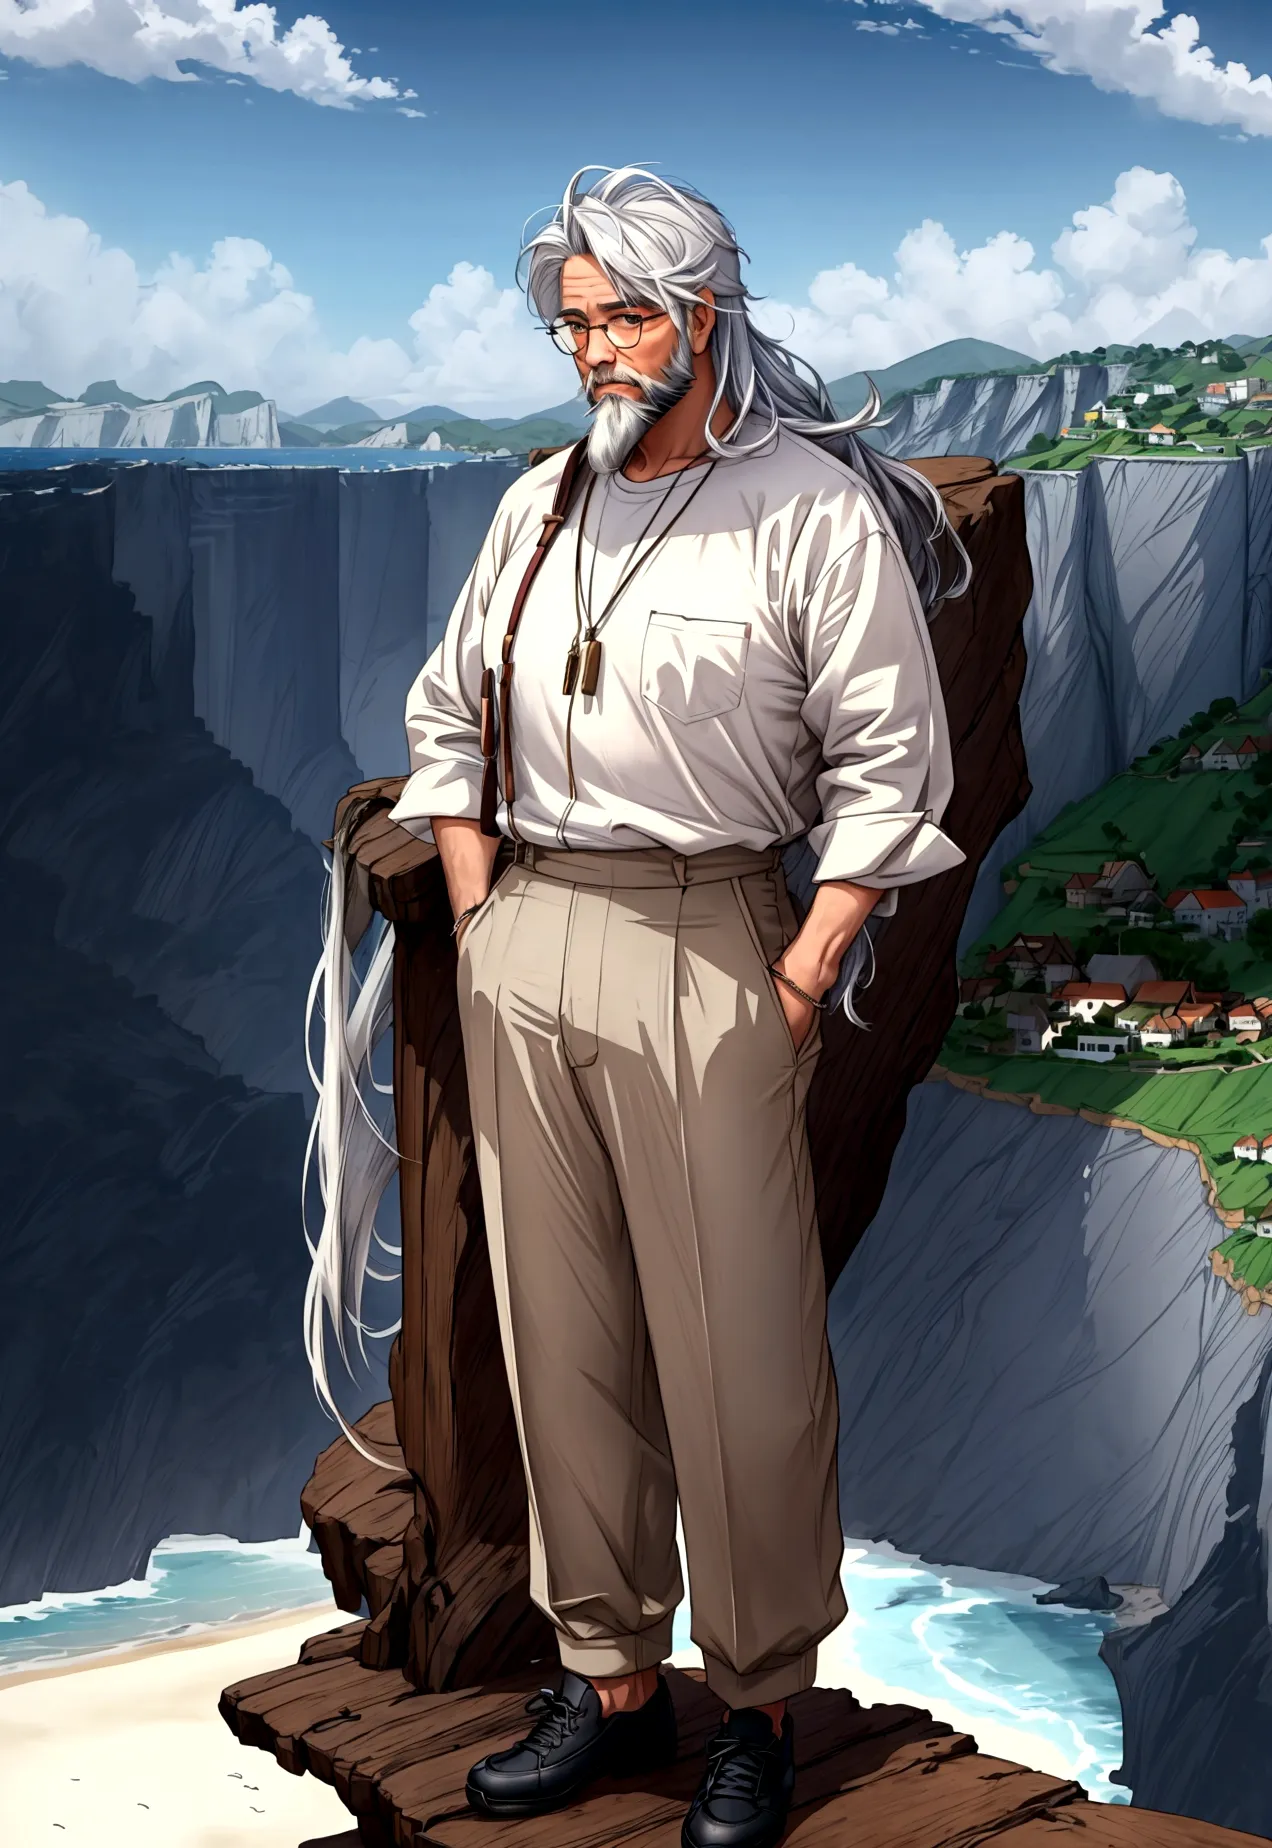 Create a high-quality anime-style image featuring an elderly man standing on a rocky cliff by the sea. The man has white hair, a...